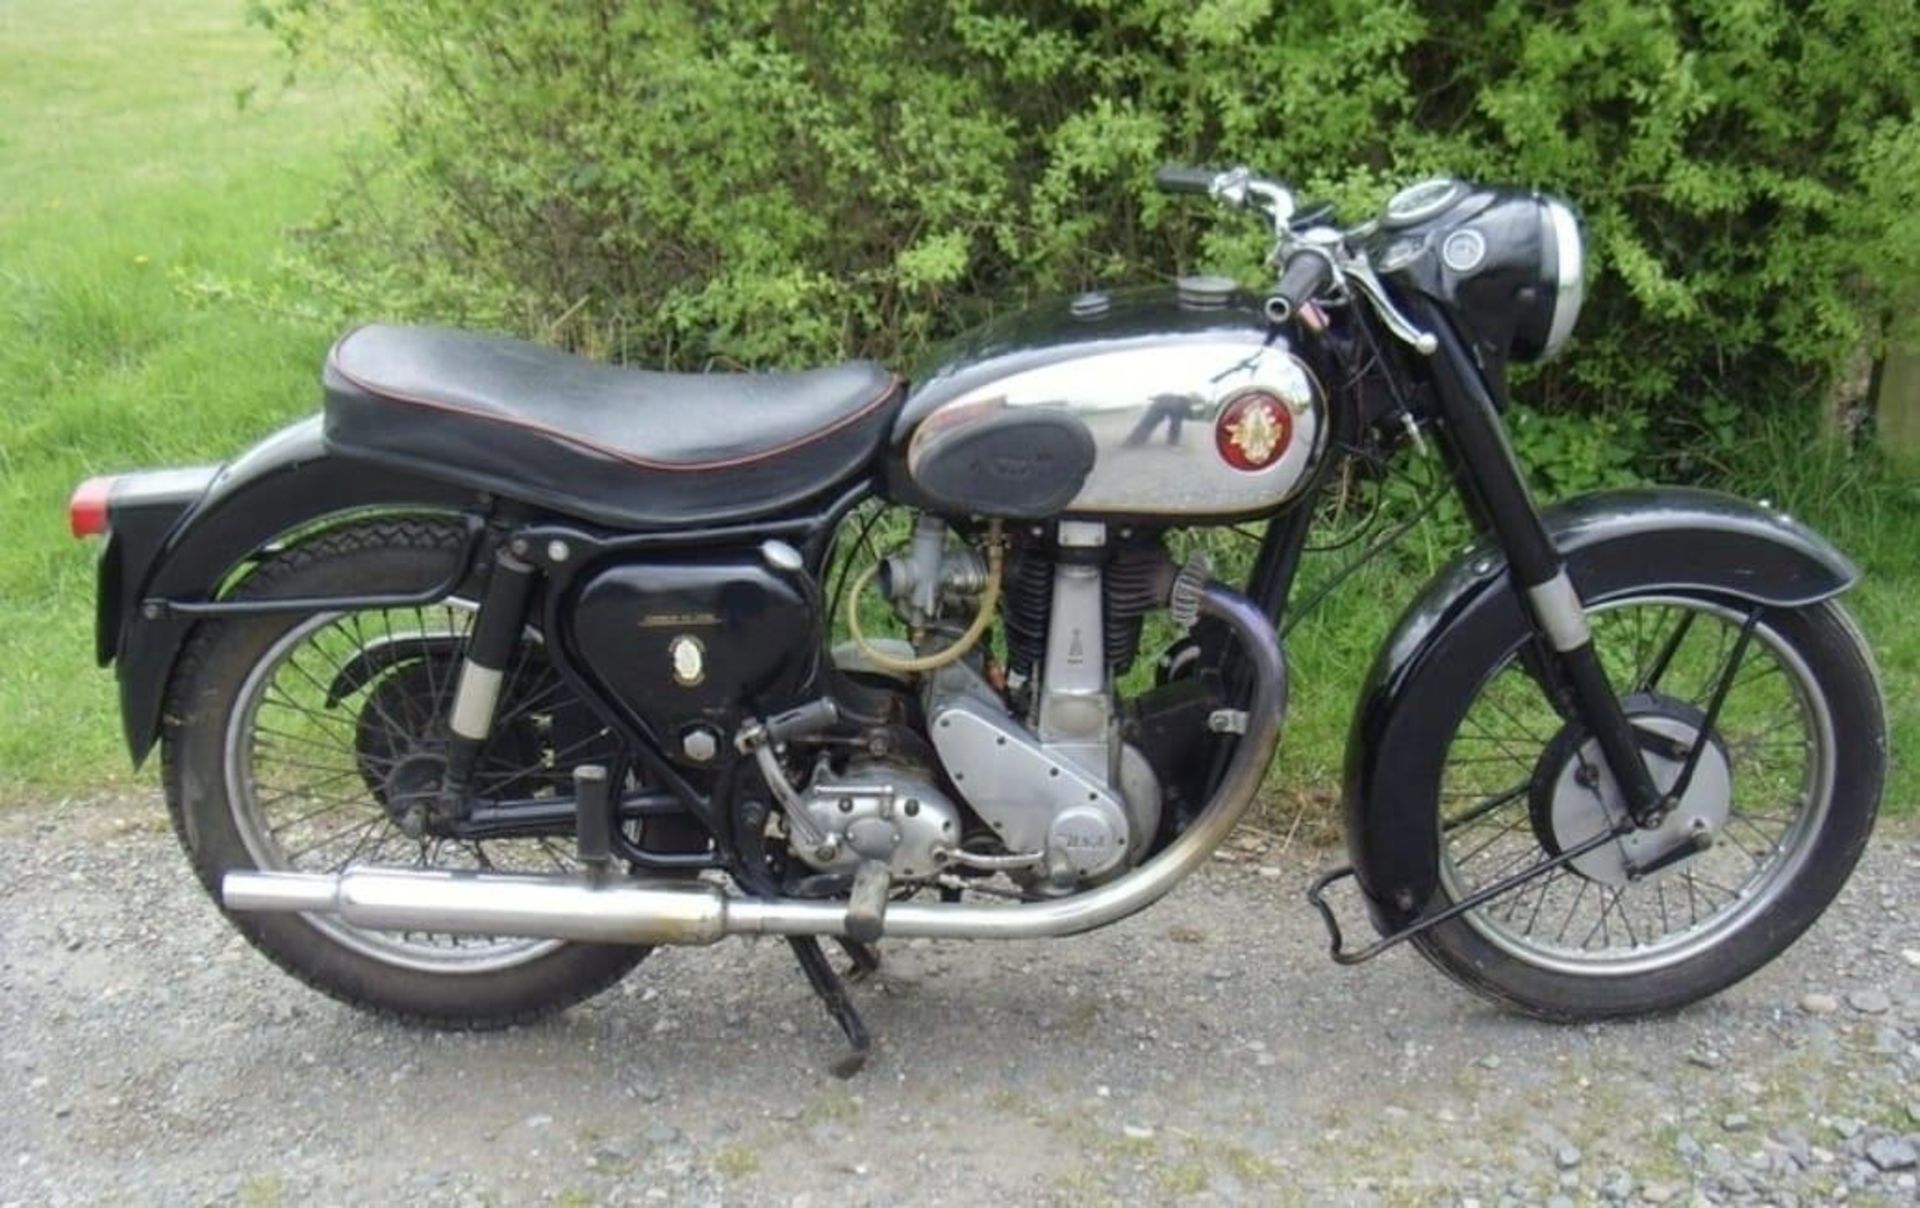 BSA B31 motorcycle. 500cc. 1954. Running order. Fitted with 500cc B33 head and barrel, 1954 swinging